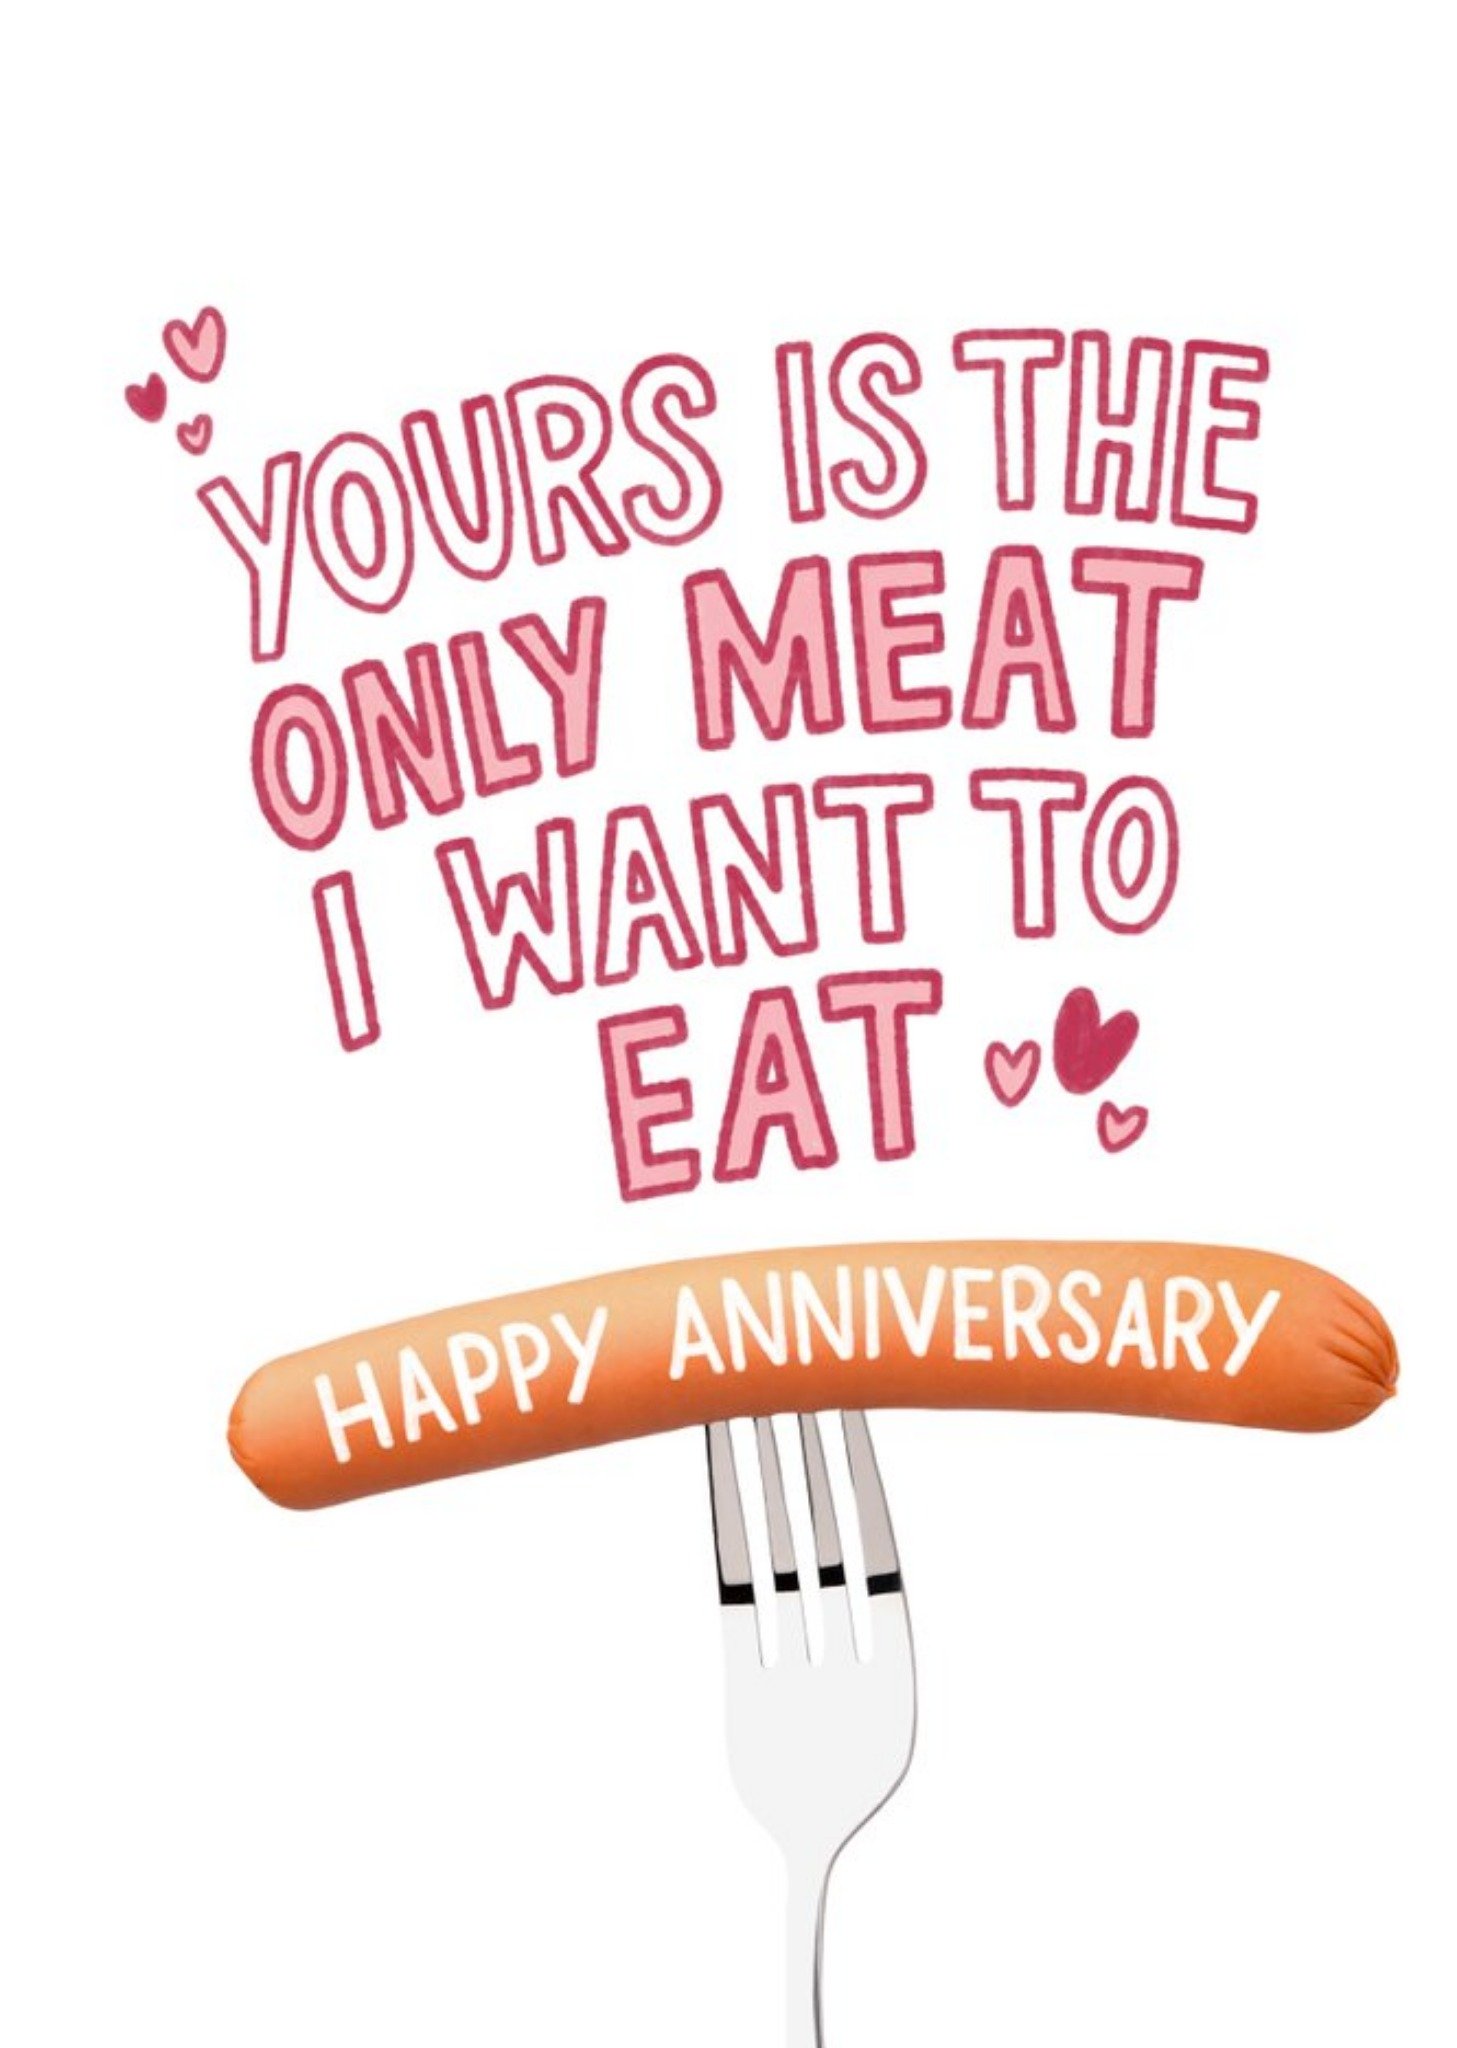 Moonpig Yours Is The Only Meat I Want To Eat Happy Anniversary Card Ecard